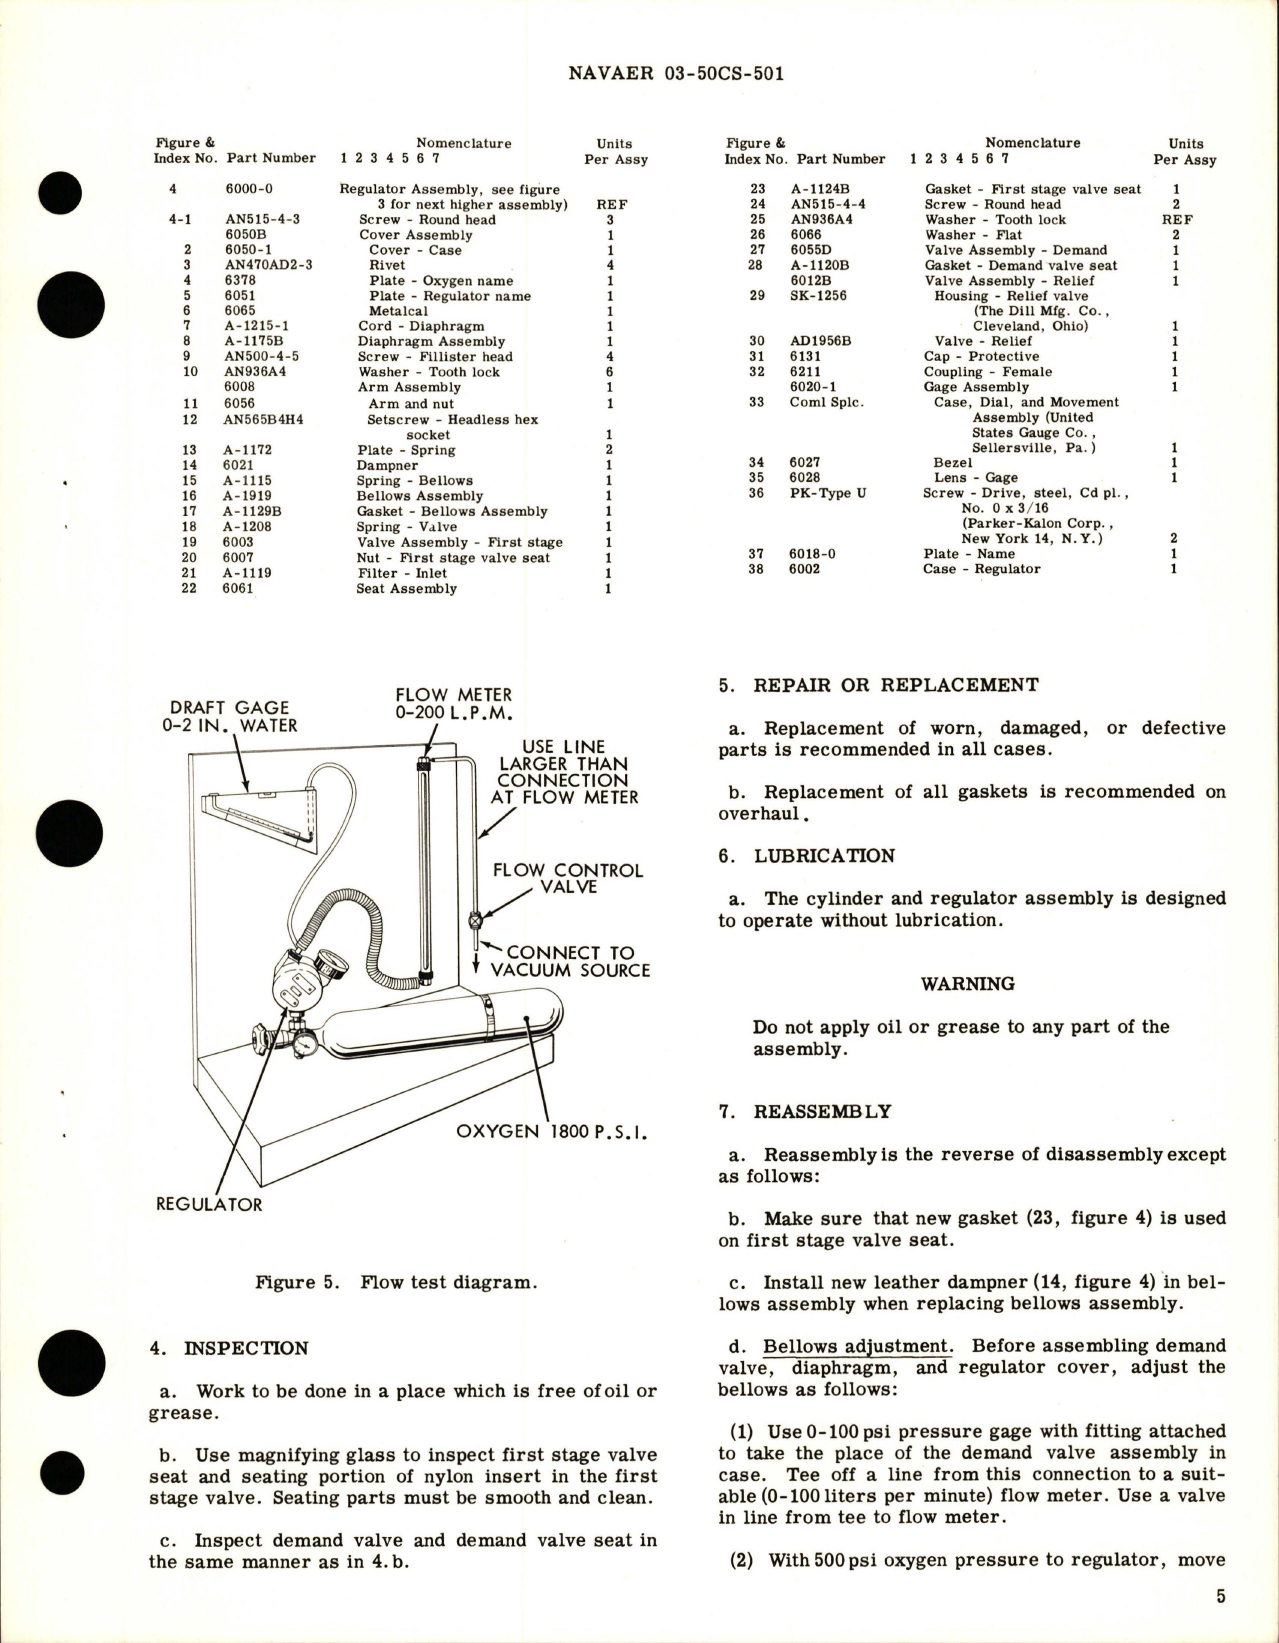 Sample page 5 from AirCorps Library document: Overhaul Instructions with Parts Breakdown for Cylinder and Regulator Oxygen Assembly - 6000-B1-0-1 